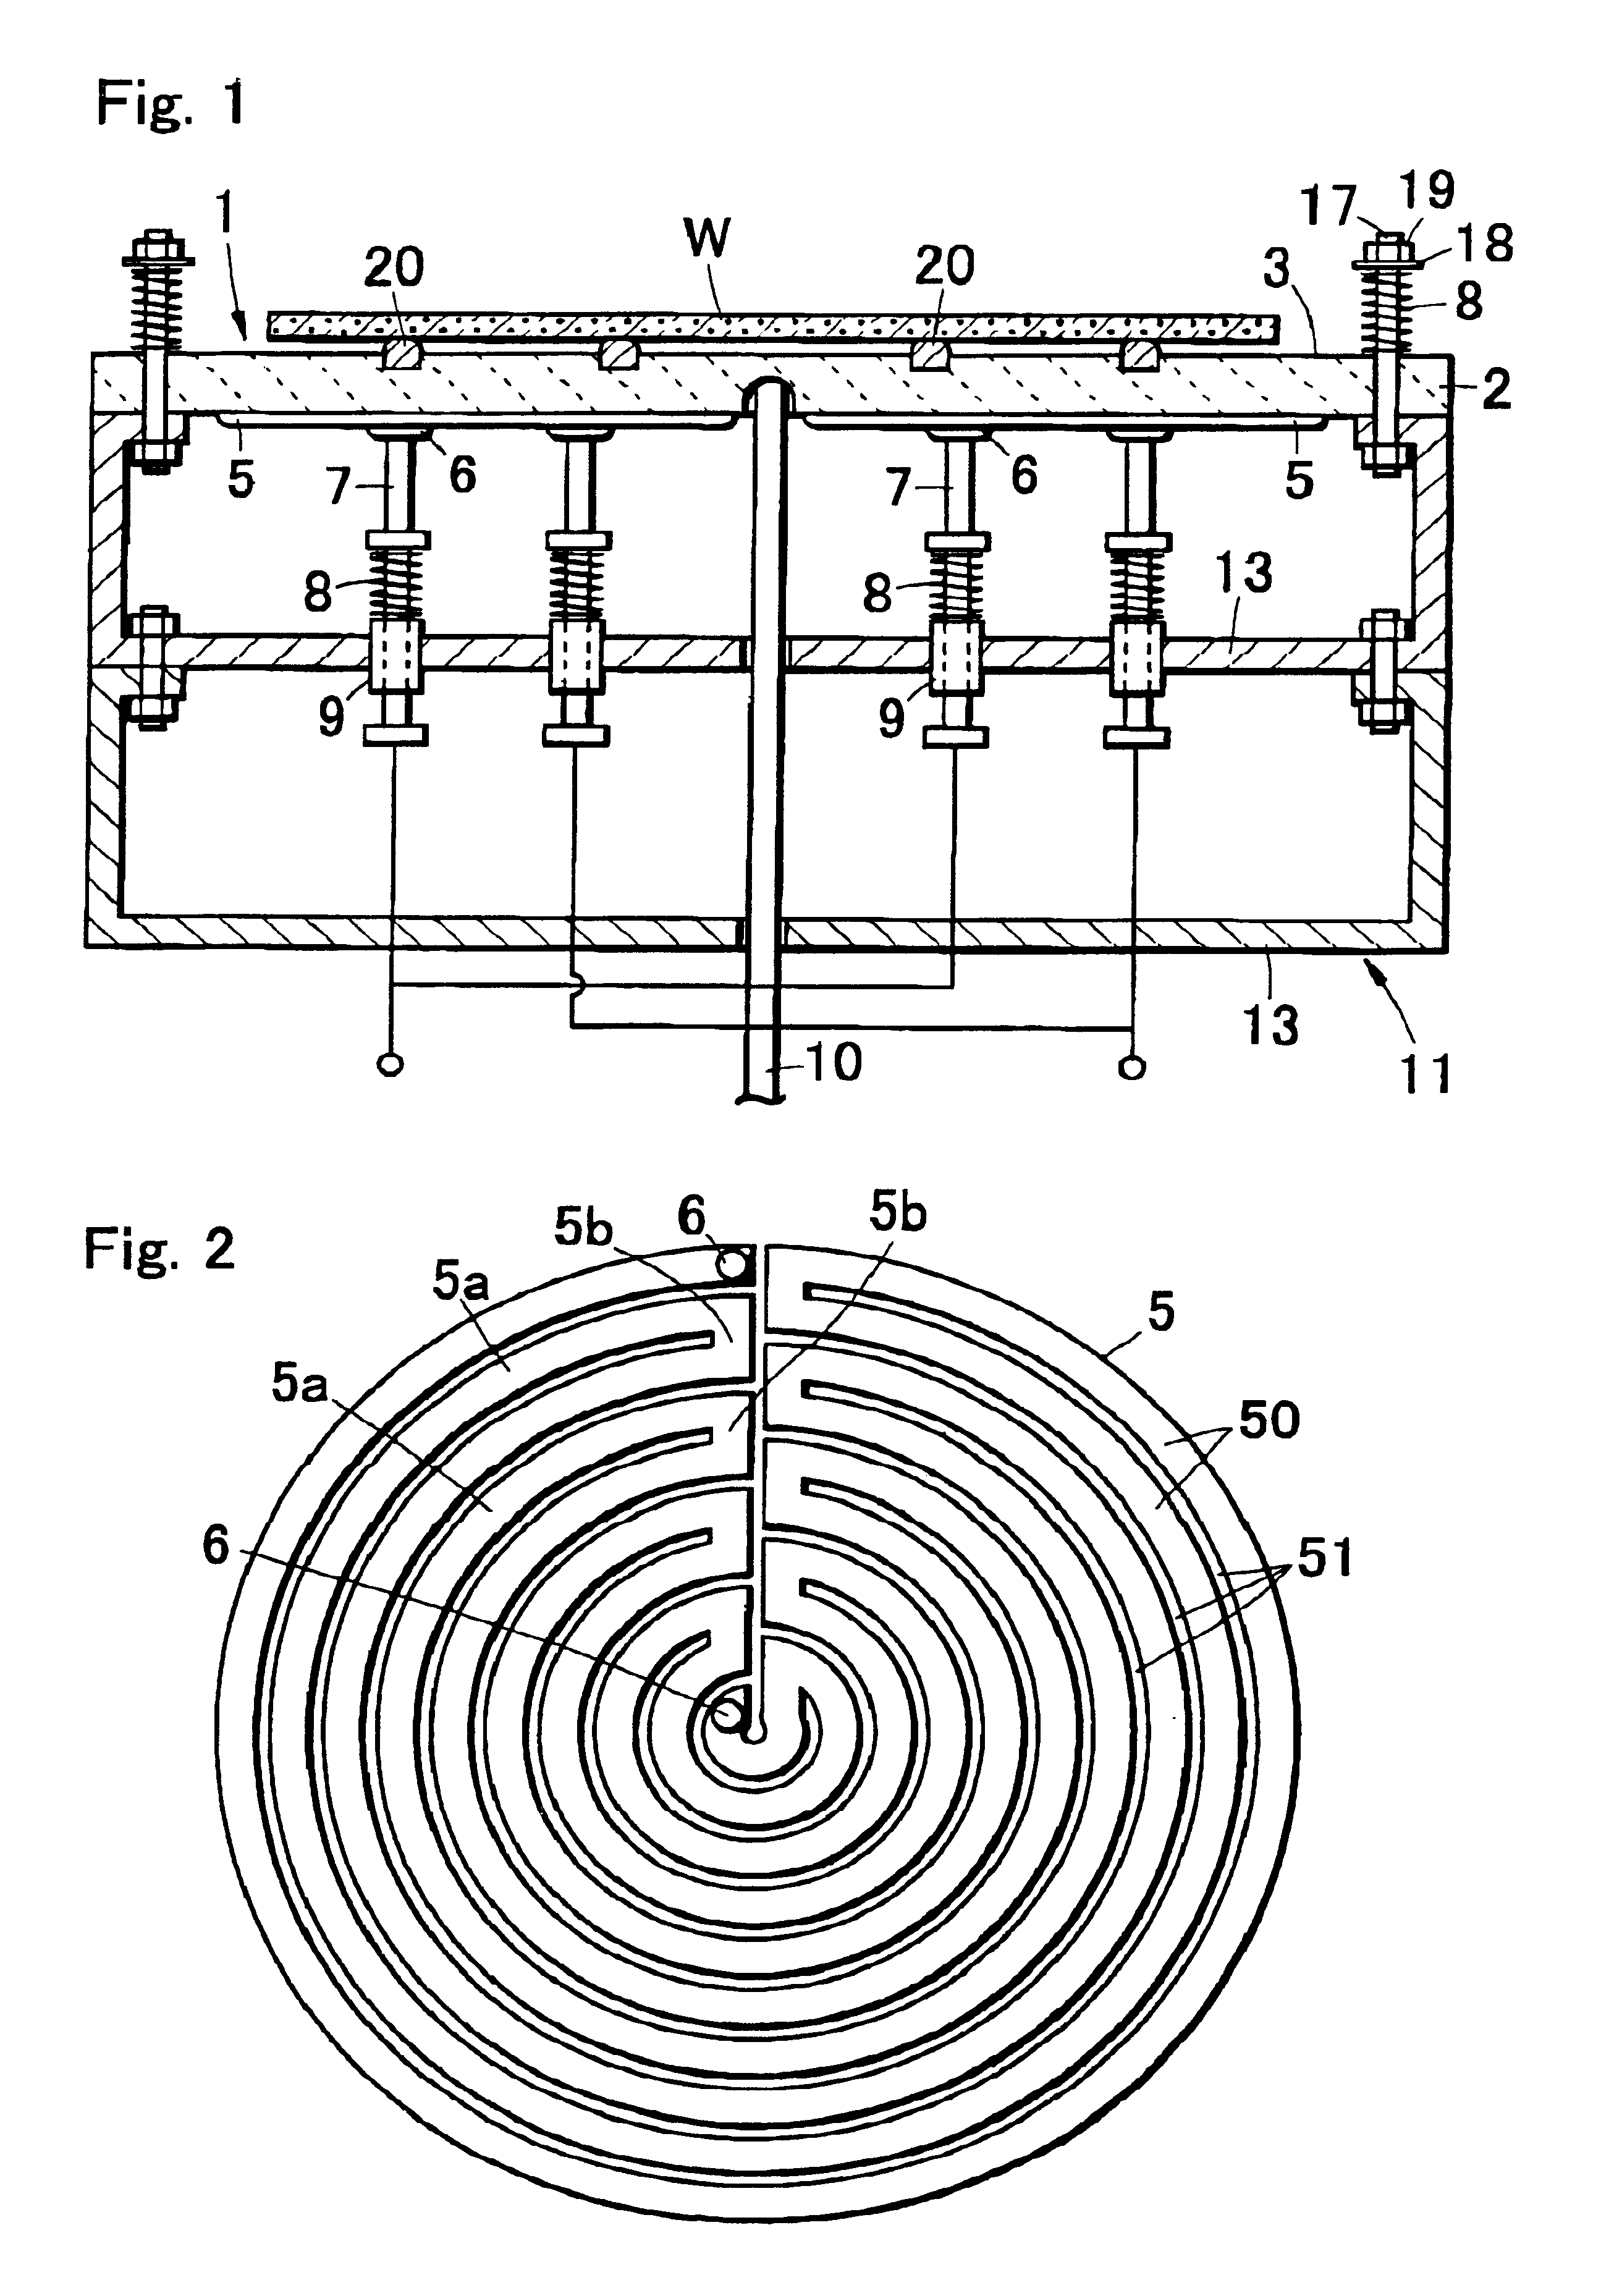 Wafer heating apparatus